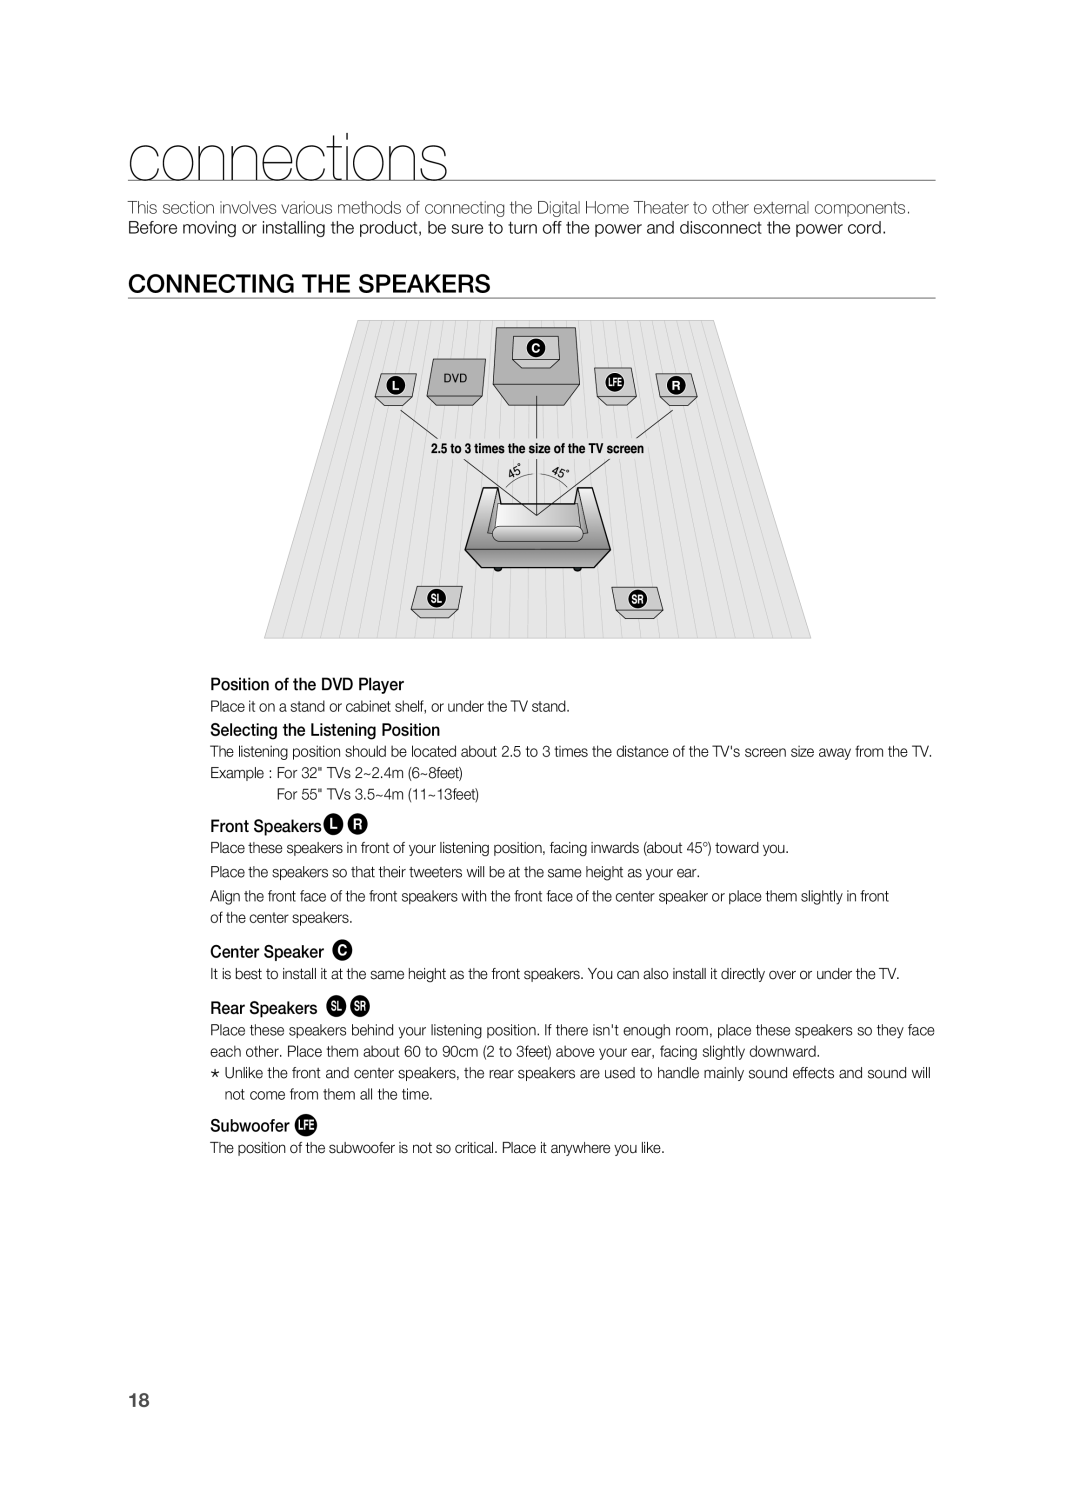 Samsung HT-TWZ415 user manual connections, Connecting the Speakers 